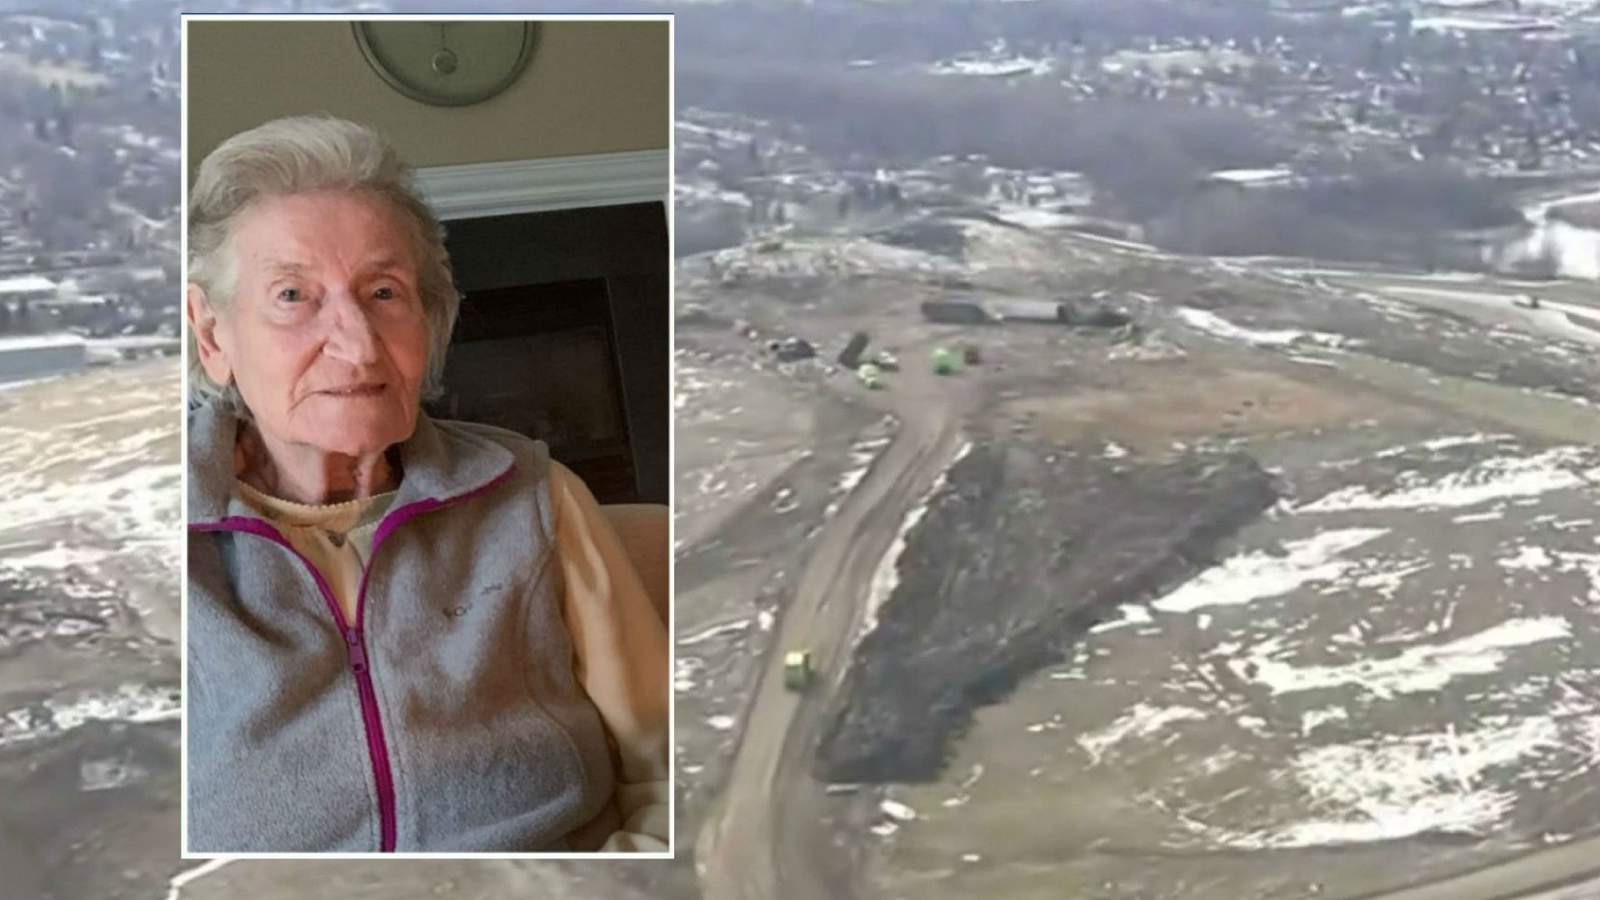 Police: No foul play suspected in death of 86-year-old woman found at Riverview landfill